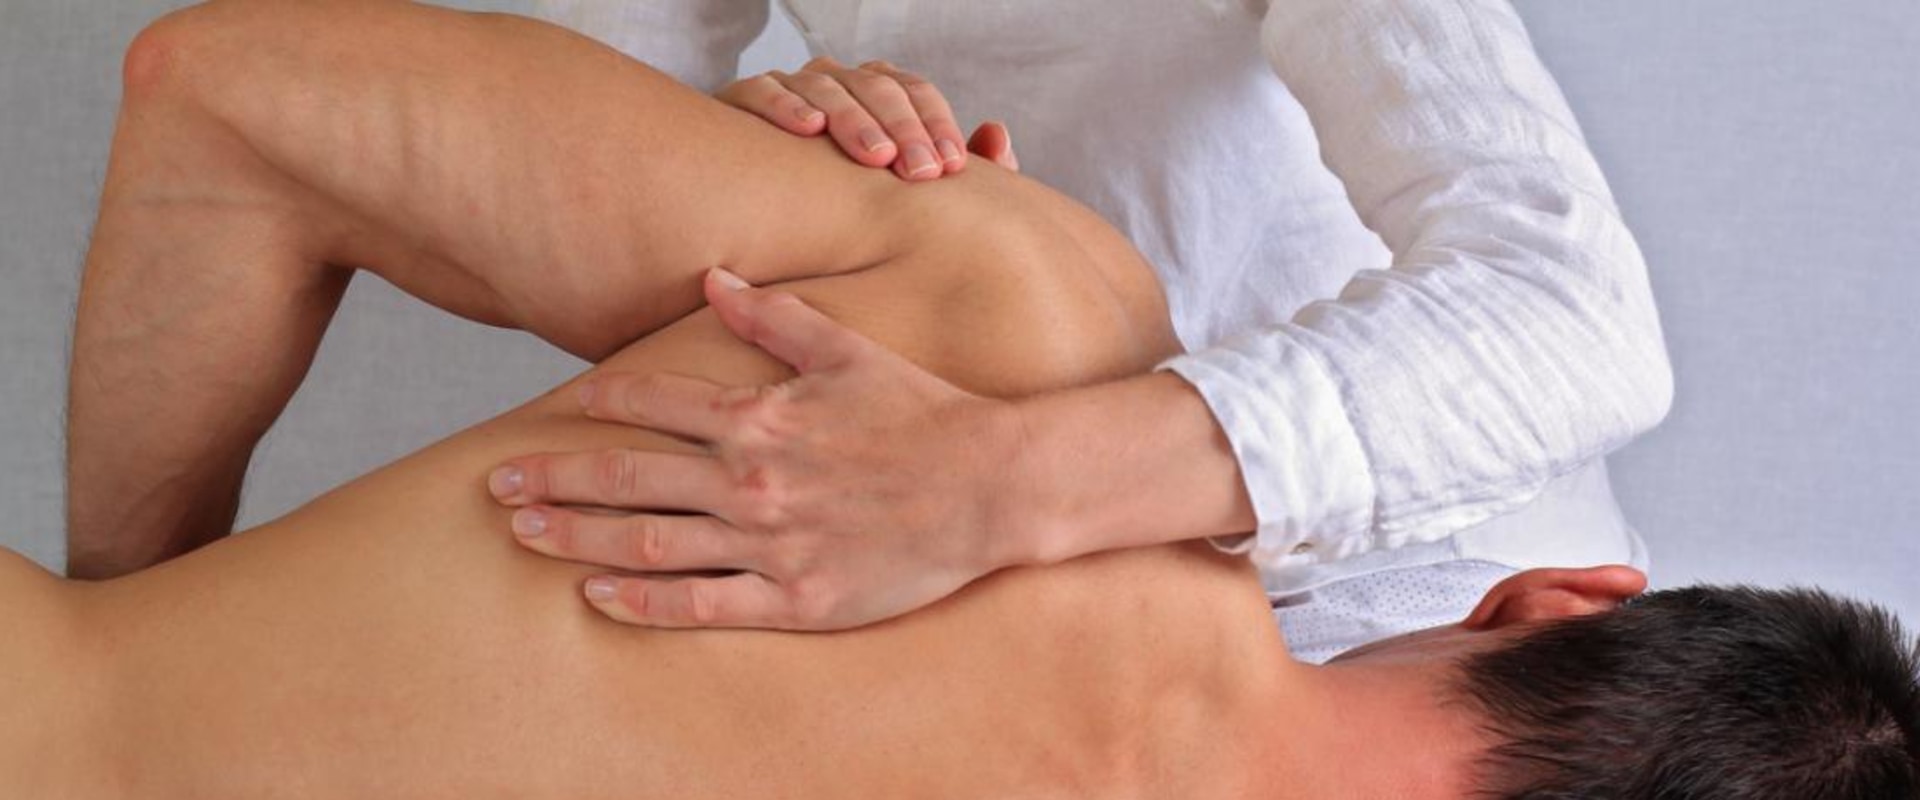 What are the disadvantages of osteopathy?